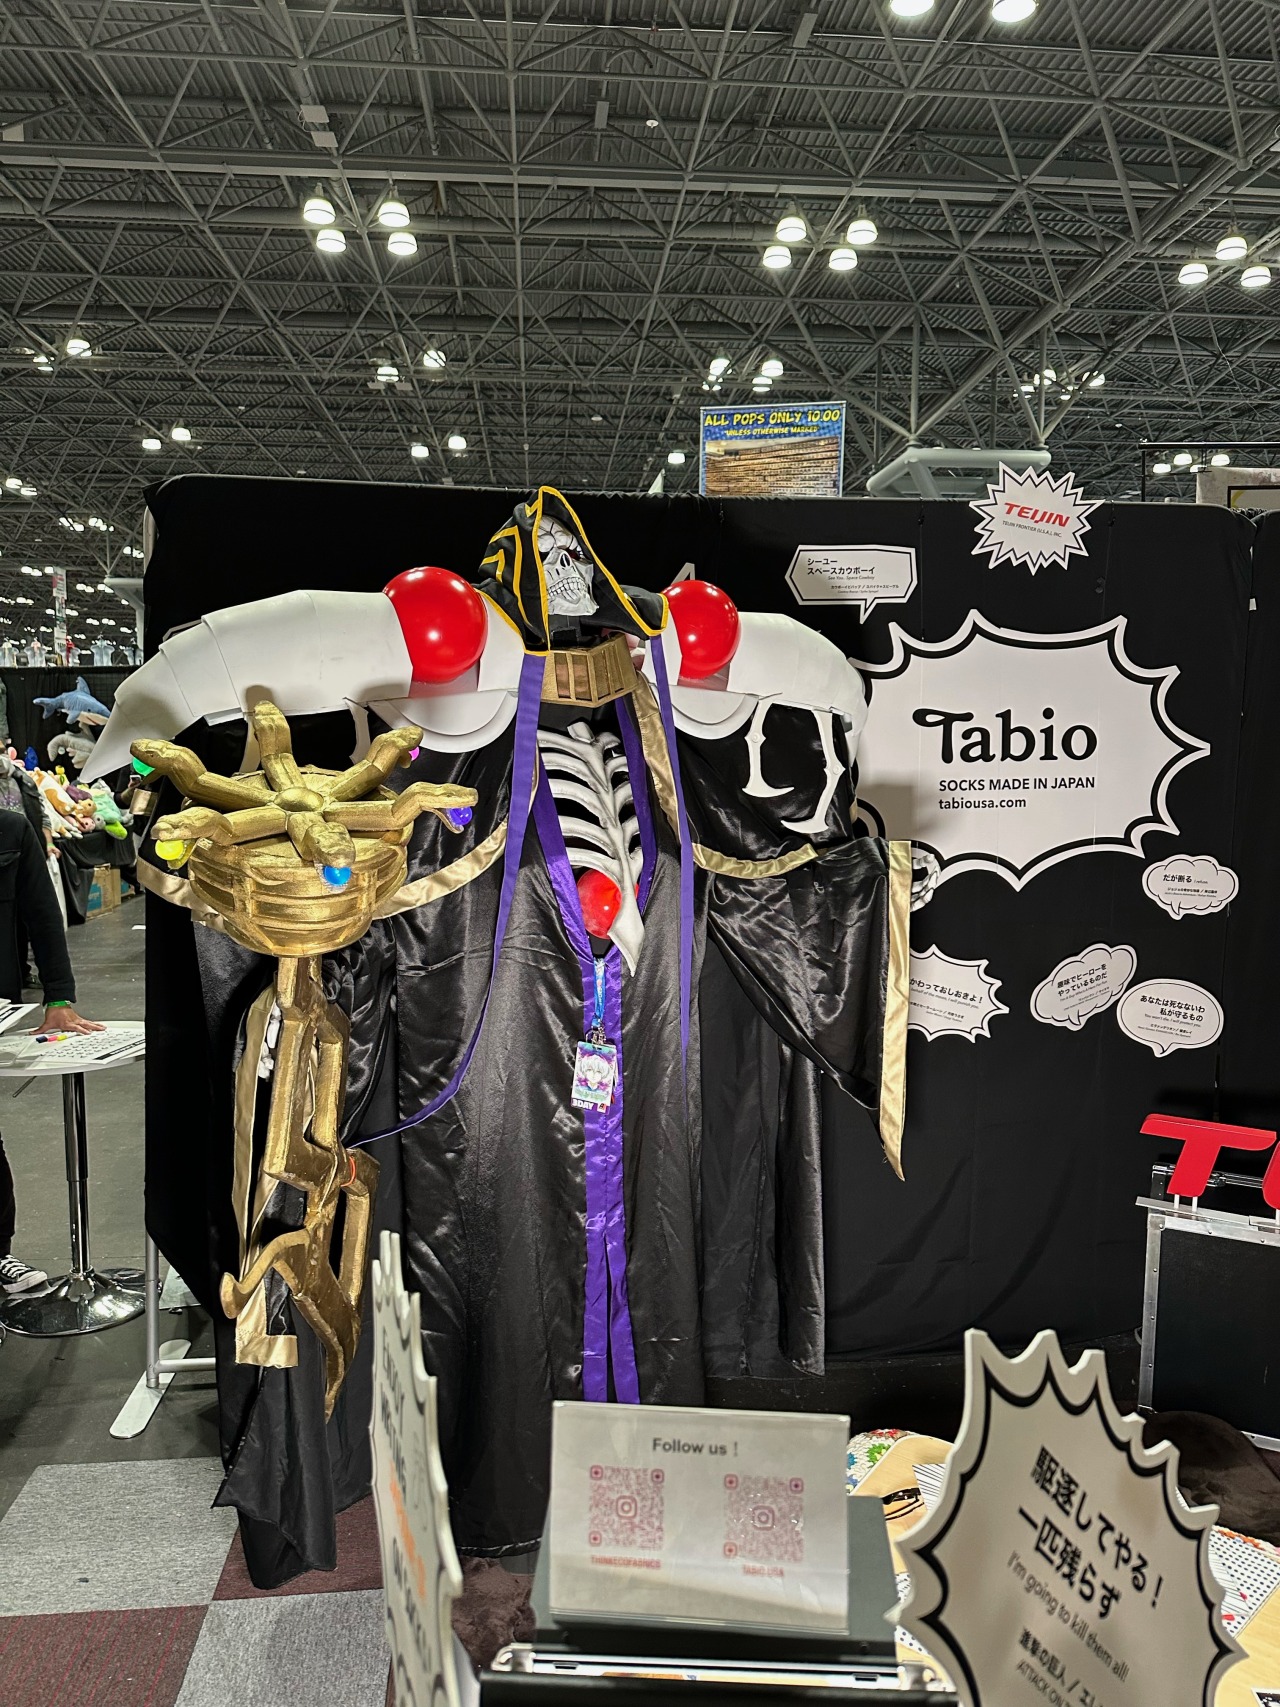 Going Beyond Limits, for Better or for Worse: Anime NYC 2021 | OGIUE MANIAX